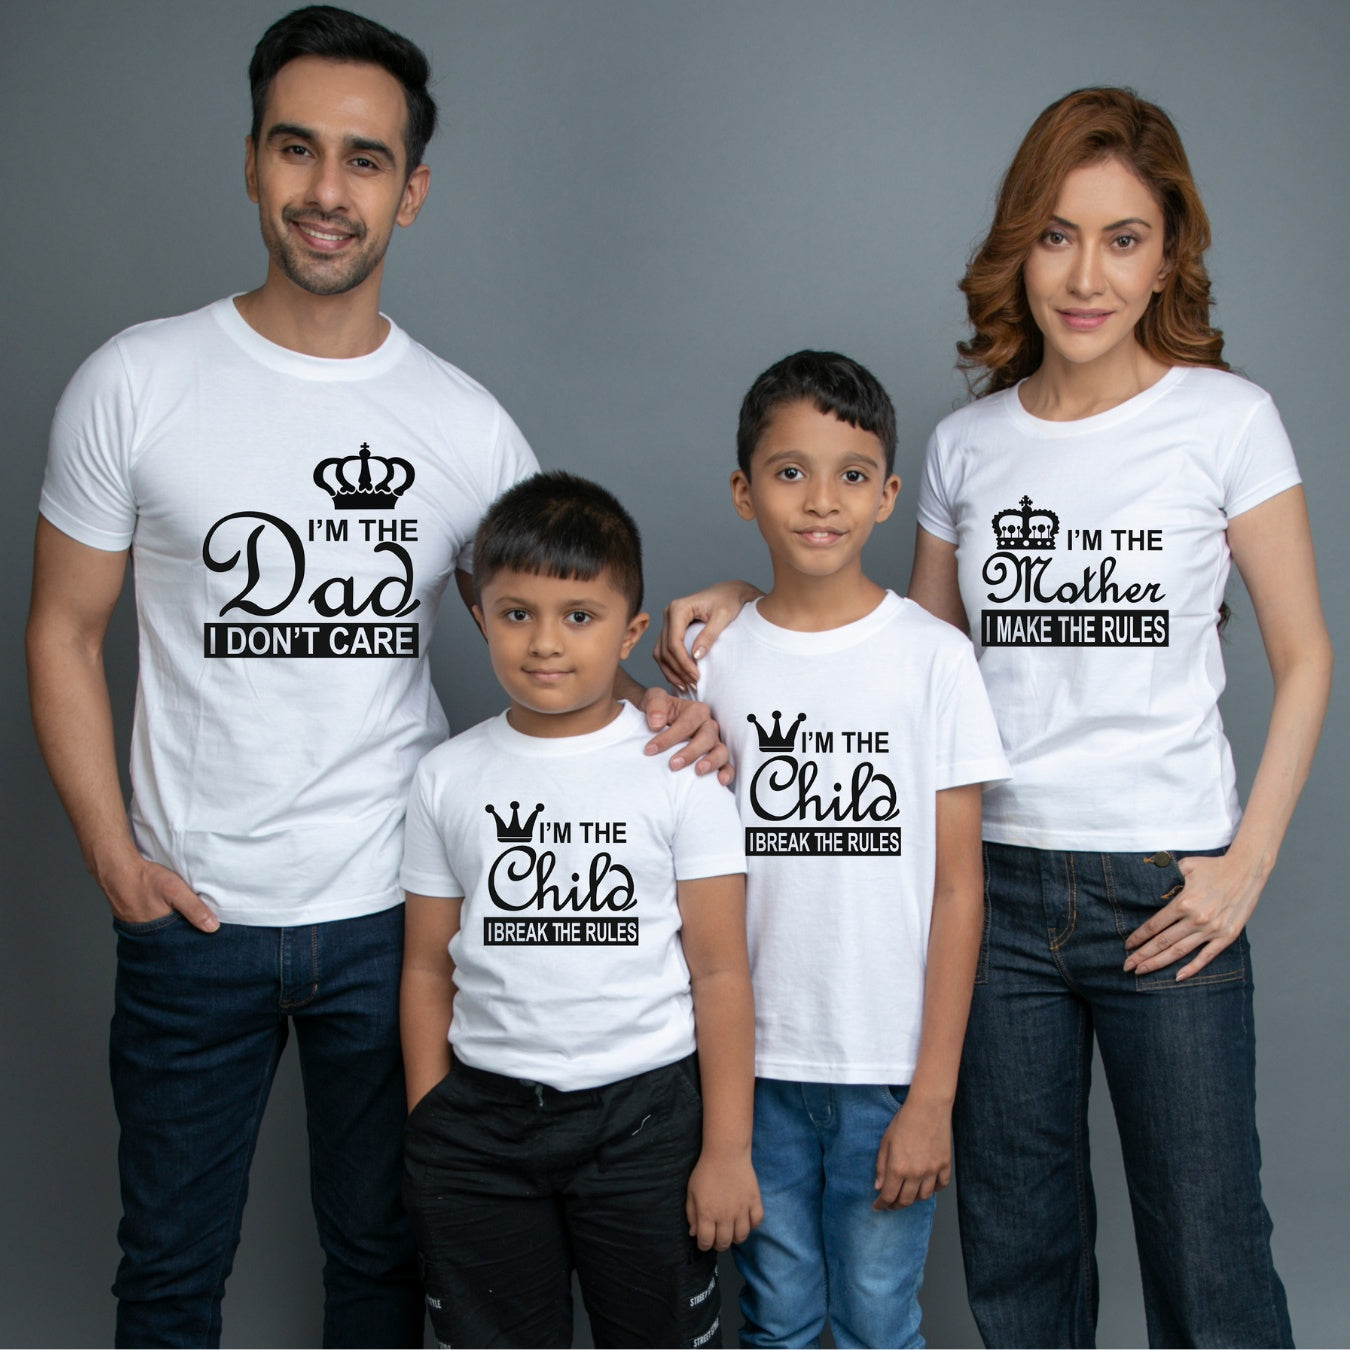 Family t shirts set of 4 Mom Dad Two Sons in White Colour - I Make Break The Rules Variant